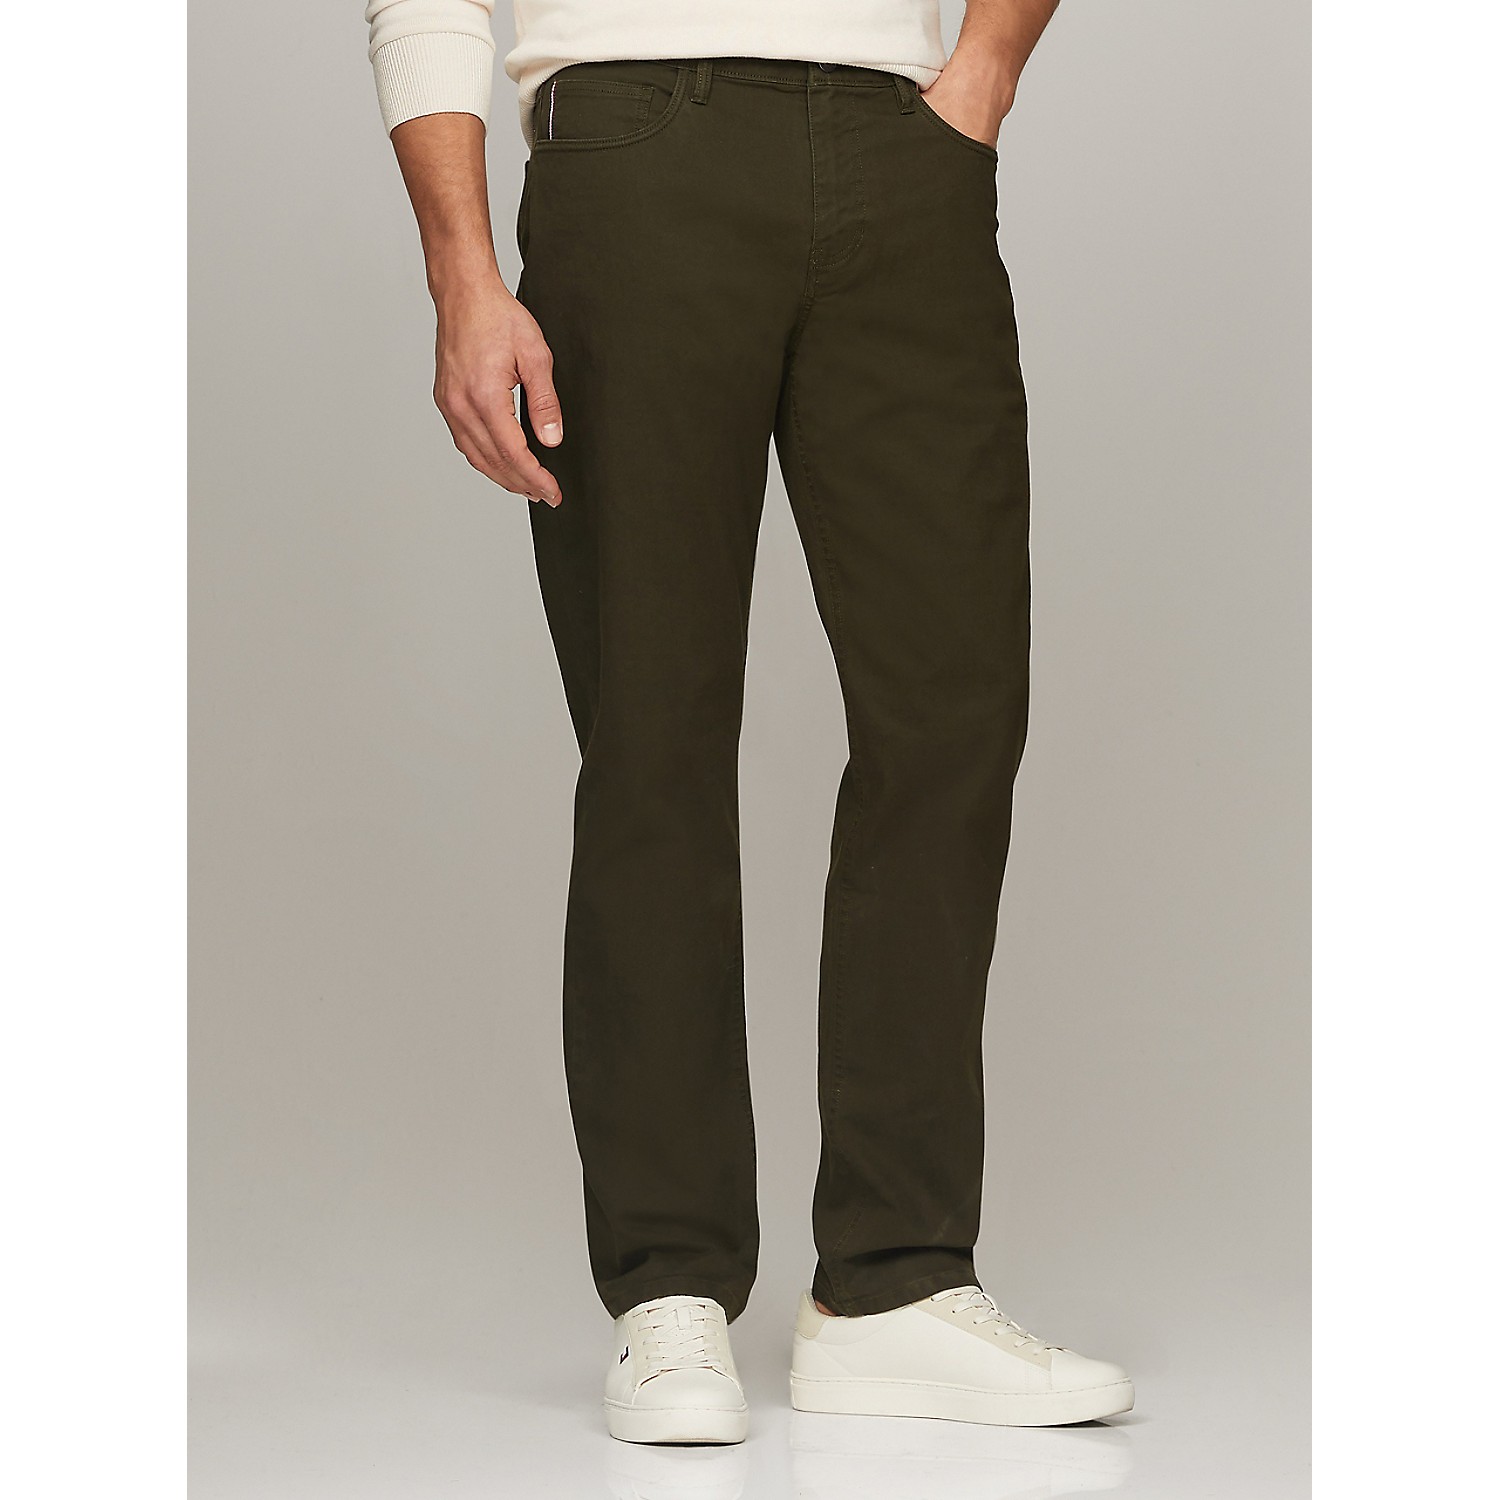 TOMMY HILFIGER Straight Fit Twill Pant